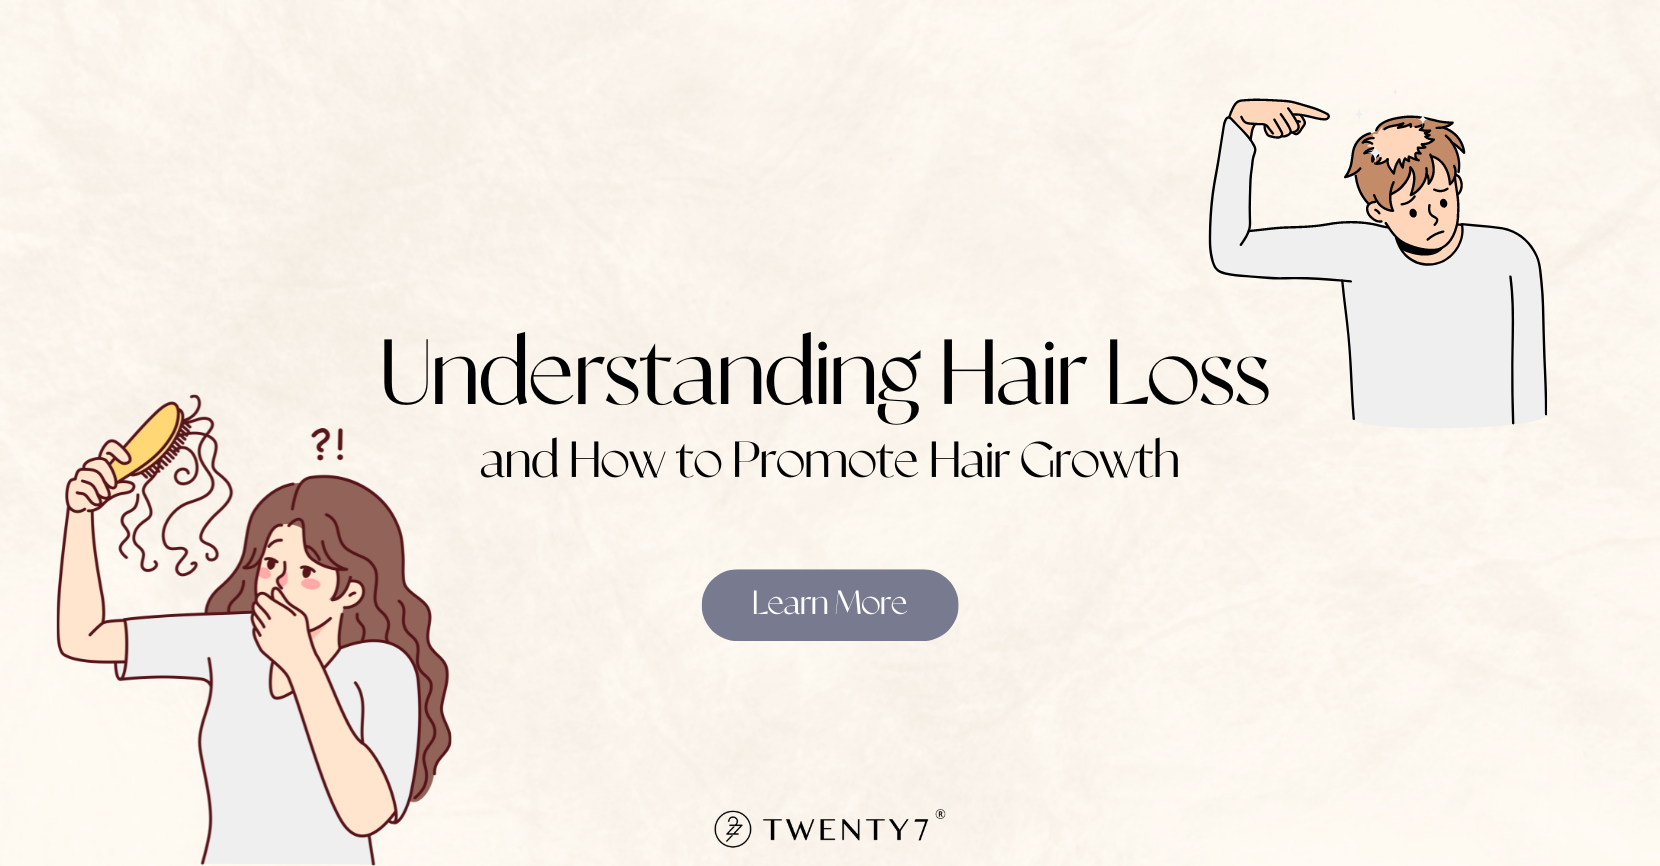 Understanding Hair Loss and How to Promote Hair Growth